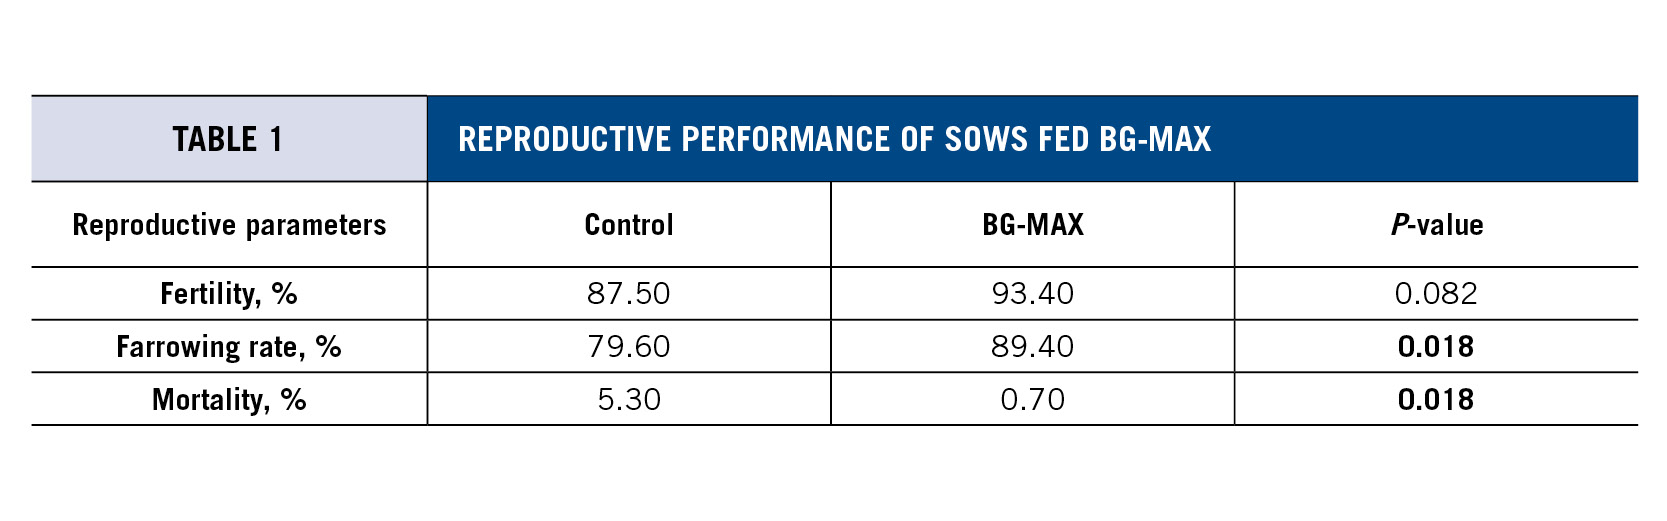 Reproduction Performance of Sows Fed BG-MAX Chart